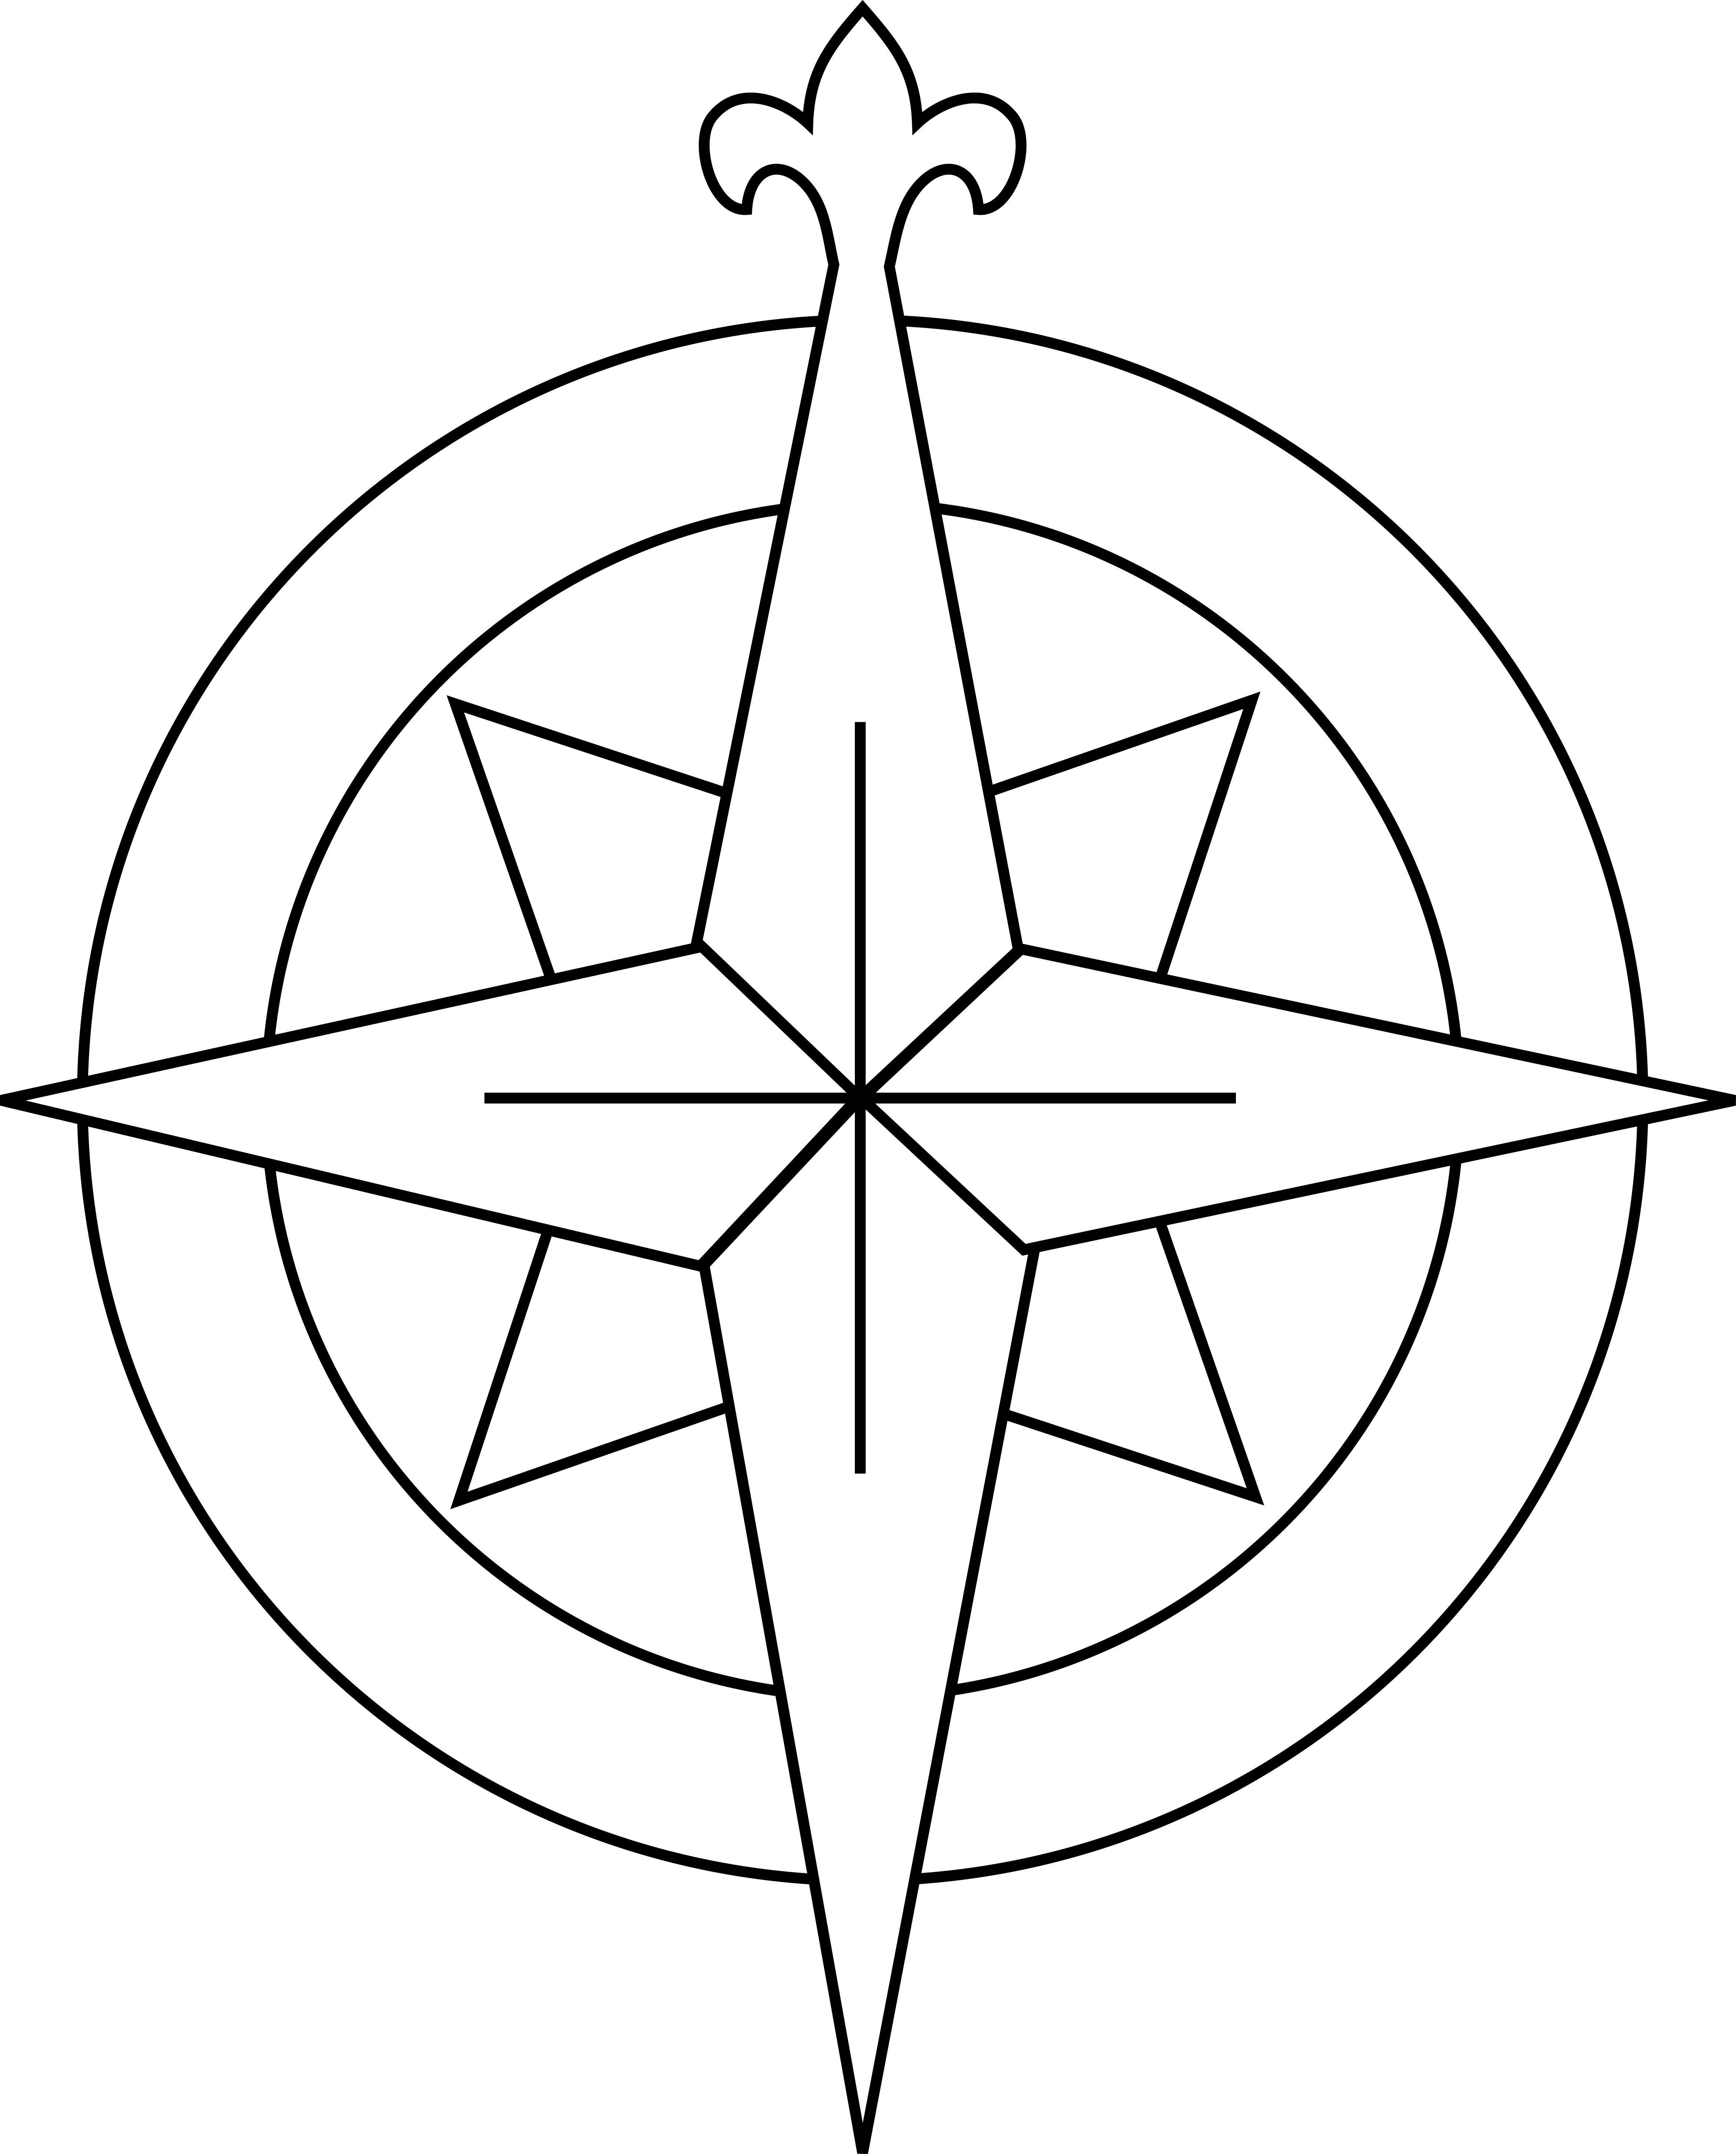 compass rose black and white